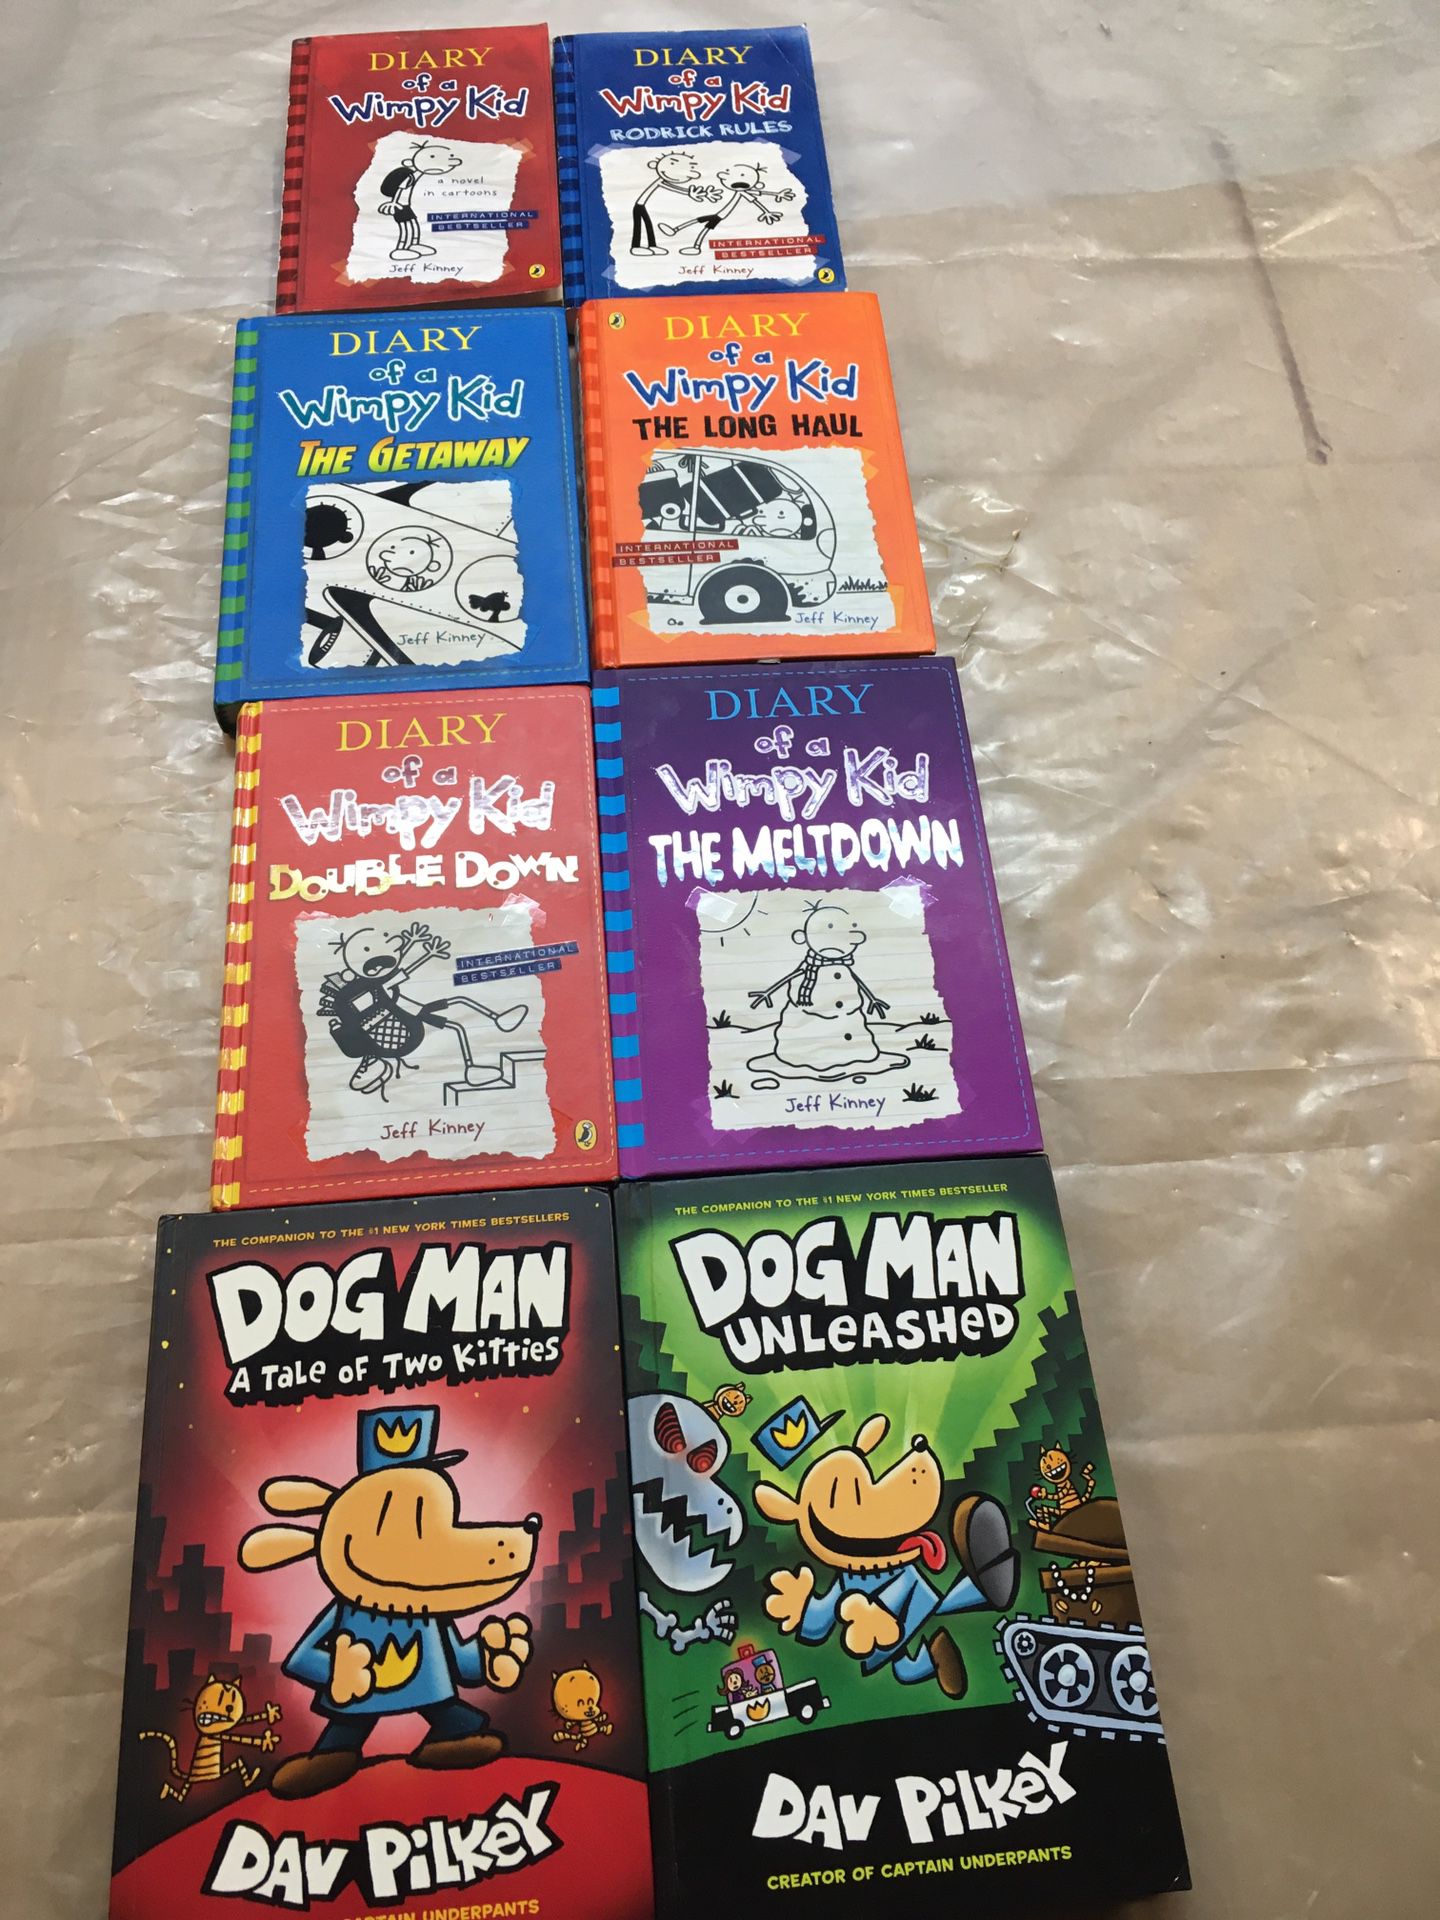 Diary of a wimpy kid and dog man(6)hard back( 2)paper bag